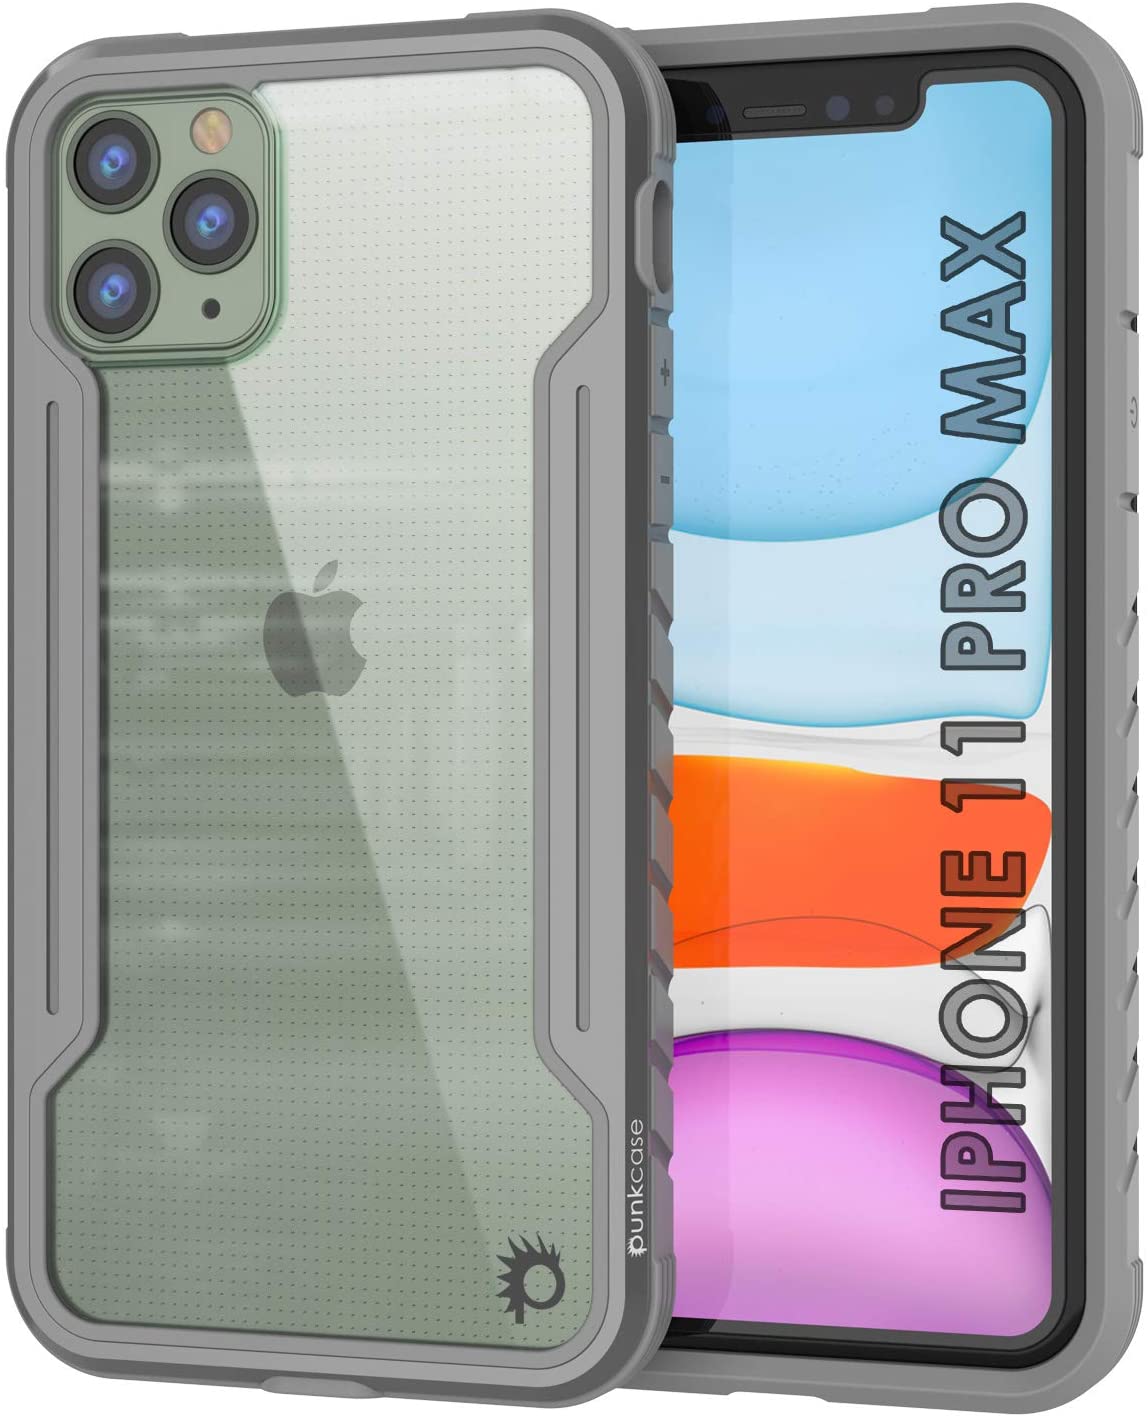 Punkcase iPhone 12 Pro Max ravenger Case Protective Military Grade Multilayer Cover [Grey] (Color in image: Grey)